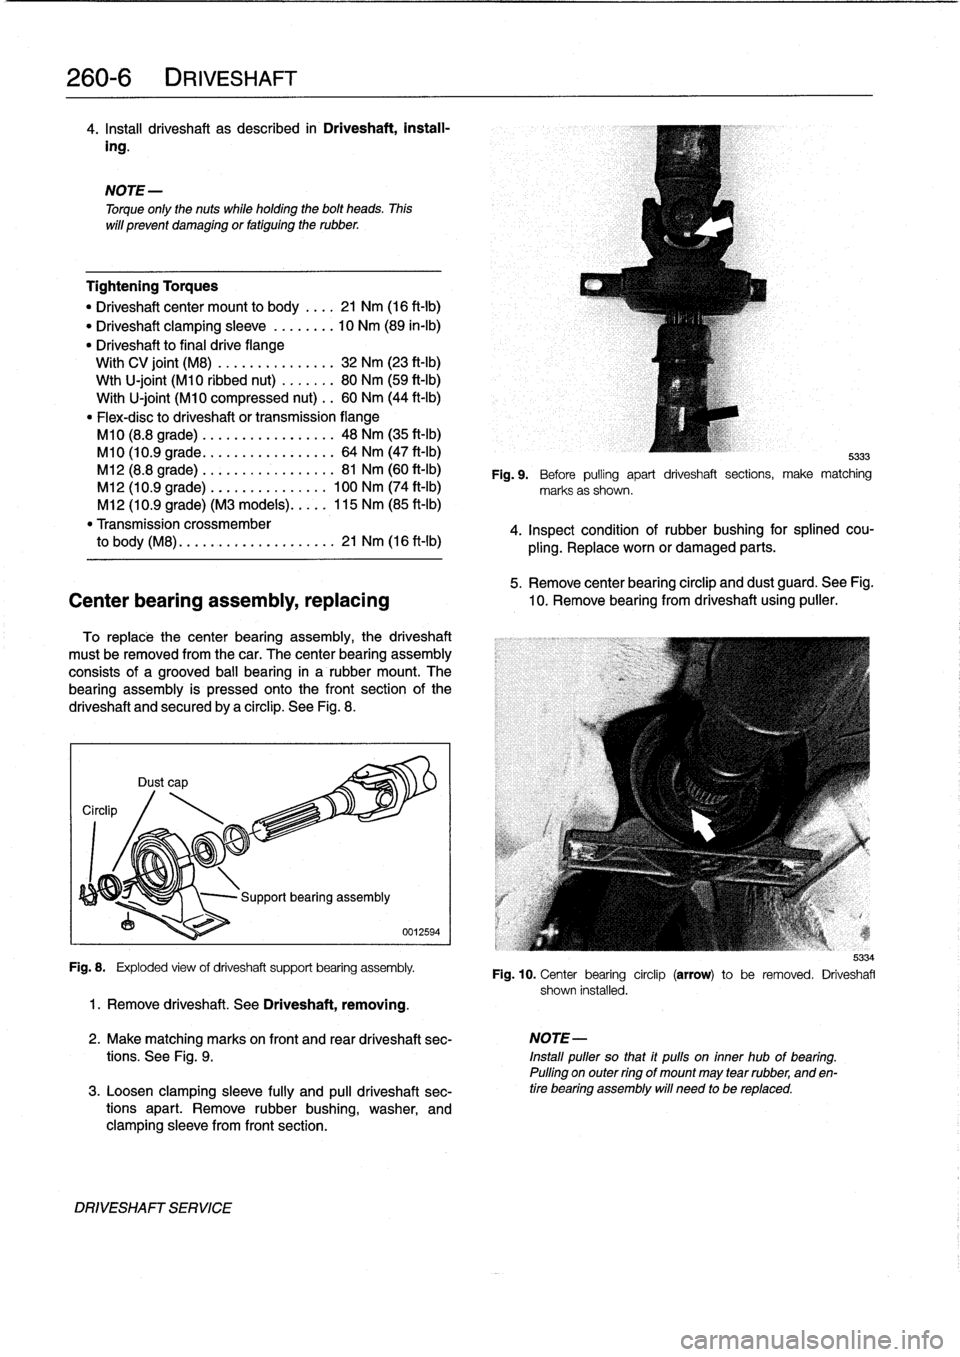 BMW 318i 1997 E36 Workshop Manual 
260-
6
DRIVESHAFT

4
.
Insta¡¡
driveshaft
as
described
in
Driveshaft,
install-

ing
.

Tightening
Torques

"
Driveshaft
center
mount
to
body
.
...
21
Nm
(16
ft-Ib)

"
Driveshaft
clamping
sleeve
...